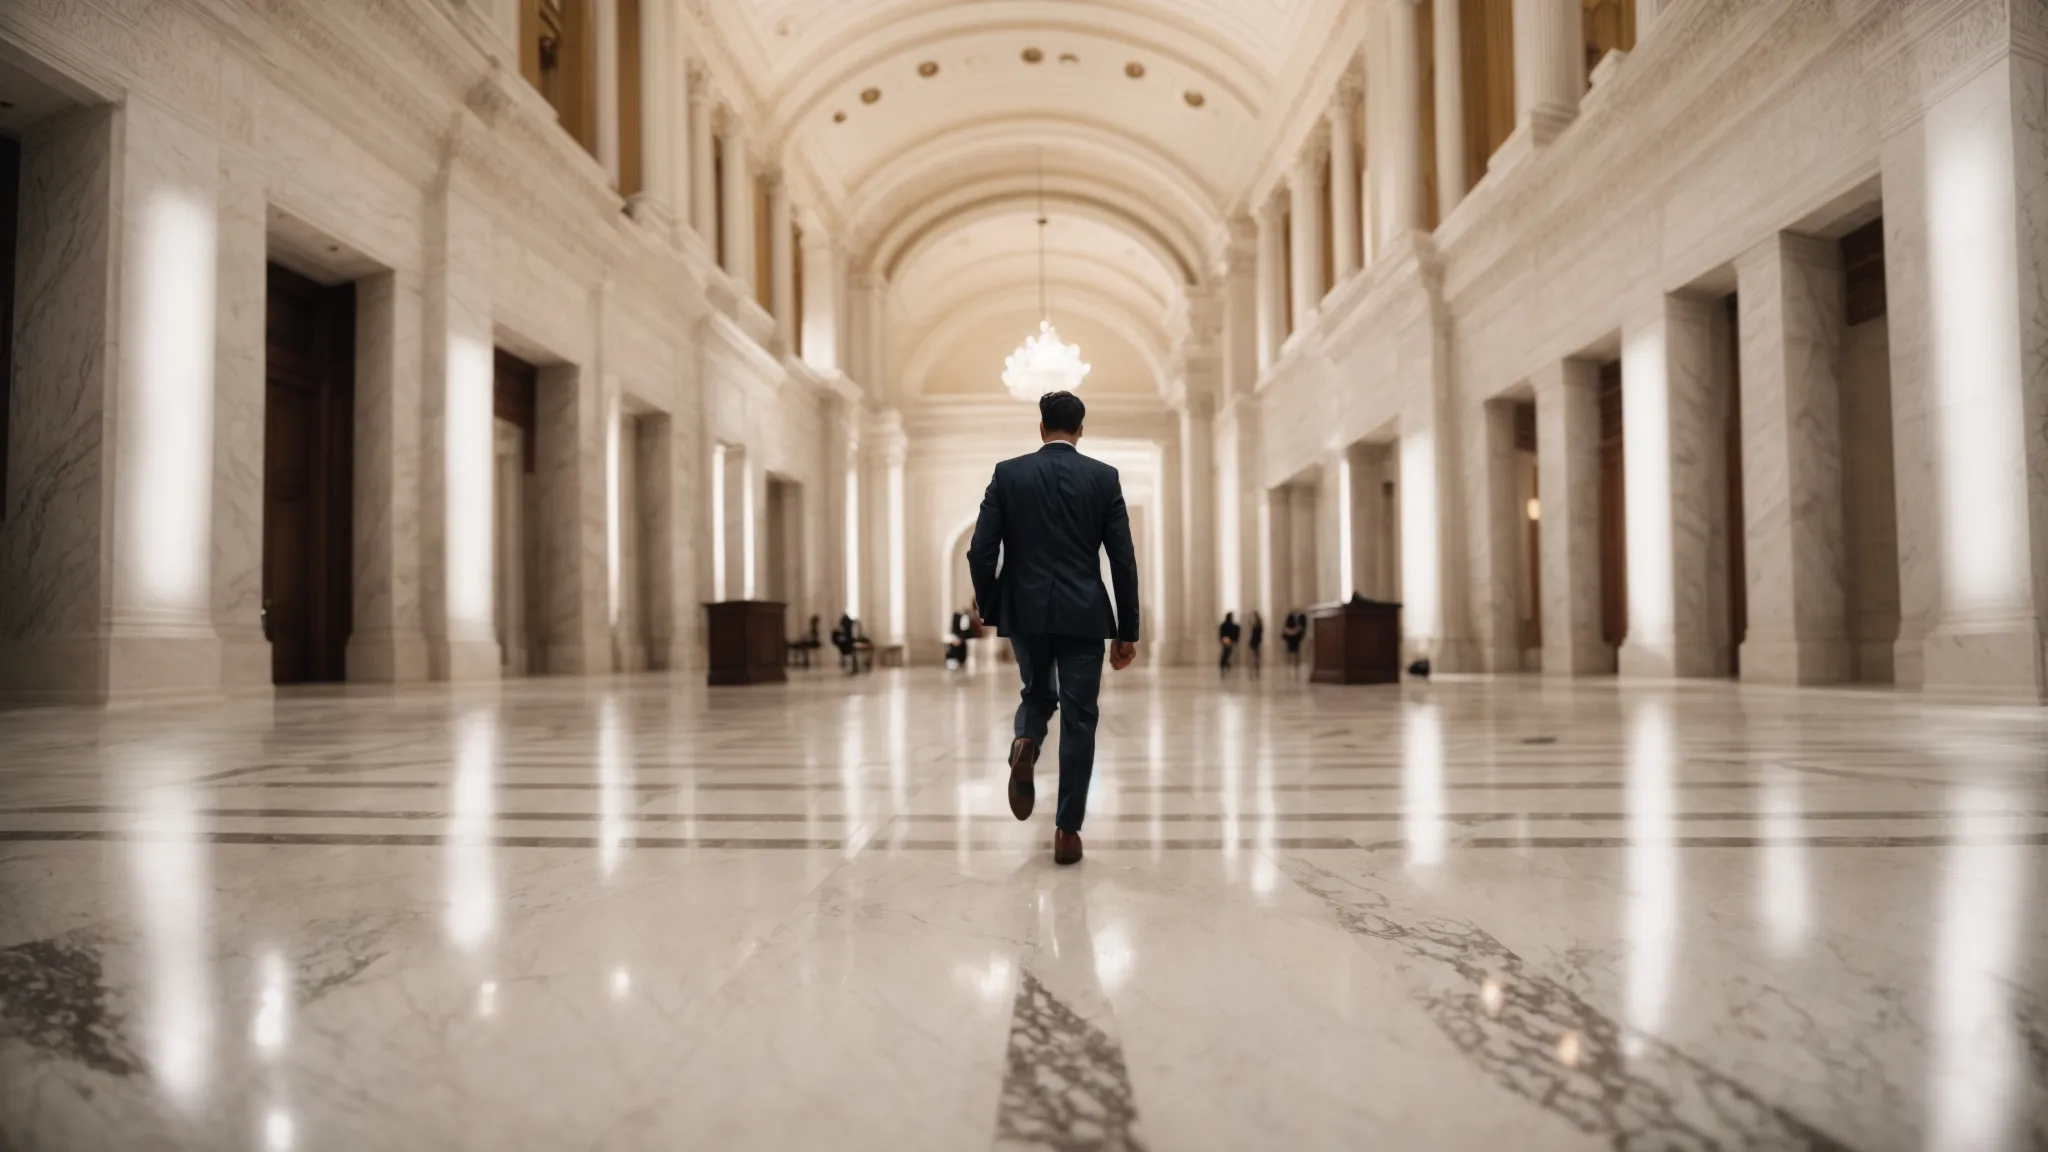 a determined attorney strides through the marble-floored lobby of a grand courthouse, ready to advocate for justice.